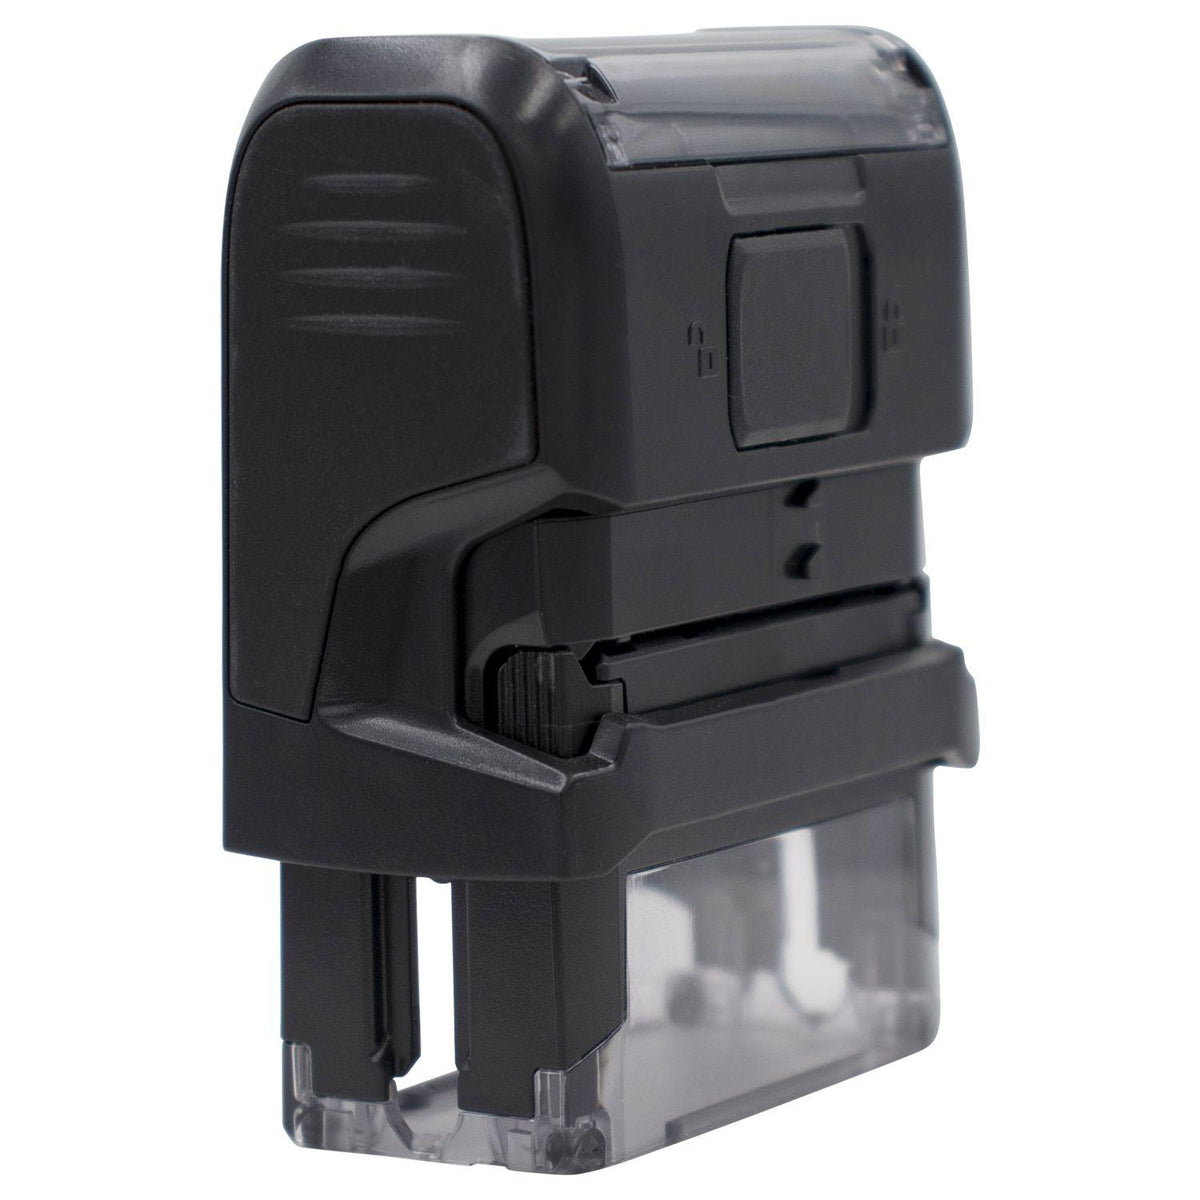 Self-Inking Social Distancing 6 Feet Stamp - Engineer Seal Stamps - Brand_Trodat, Impression Size_Small, Stamp Type_Self-Inking Stamp, Type of Use_Medical Office